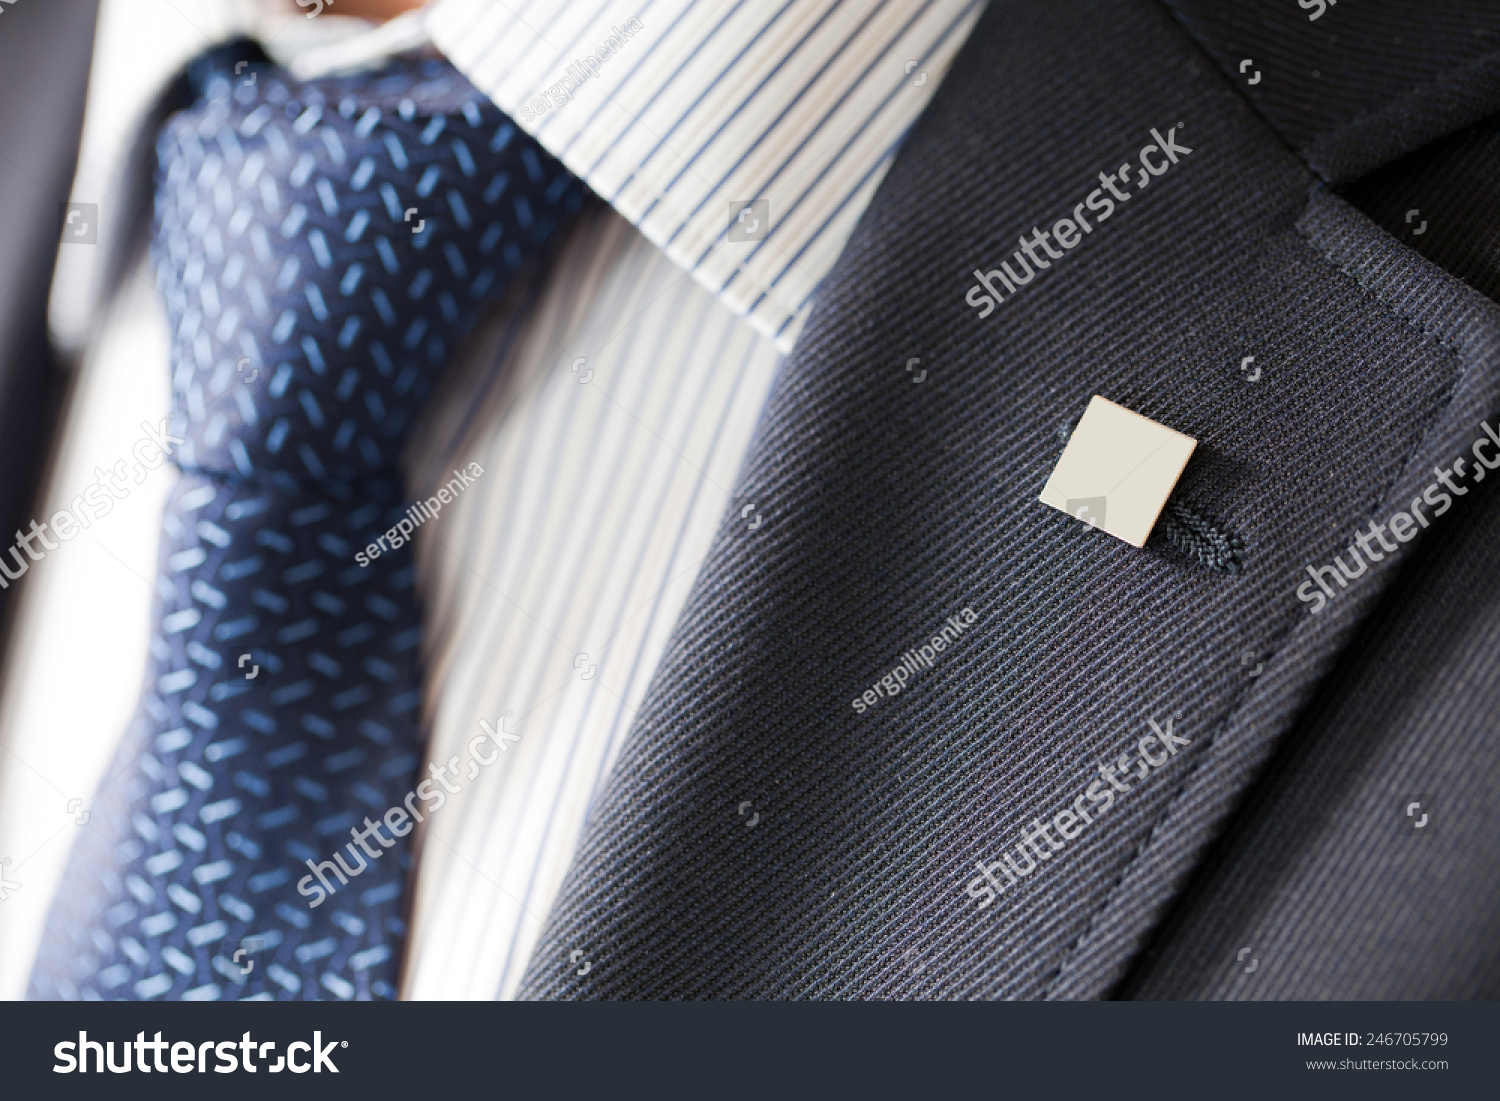 badge on the lapel of his jacket men's shirt with a blue tie #246705799